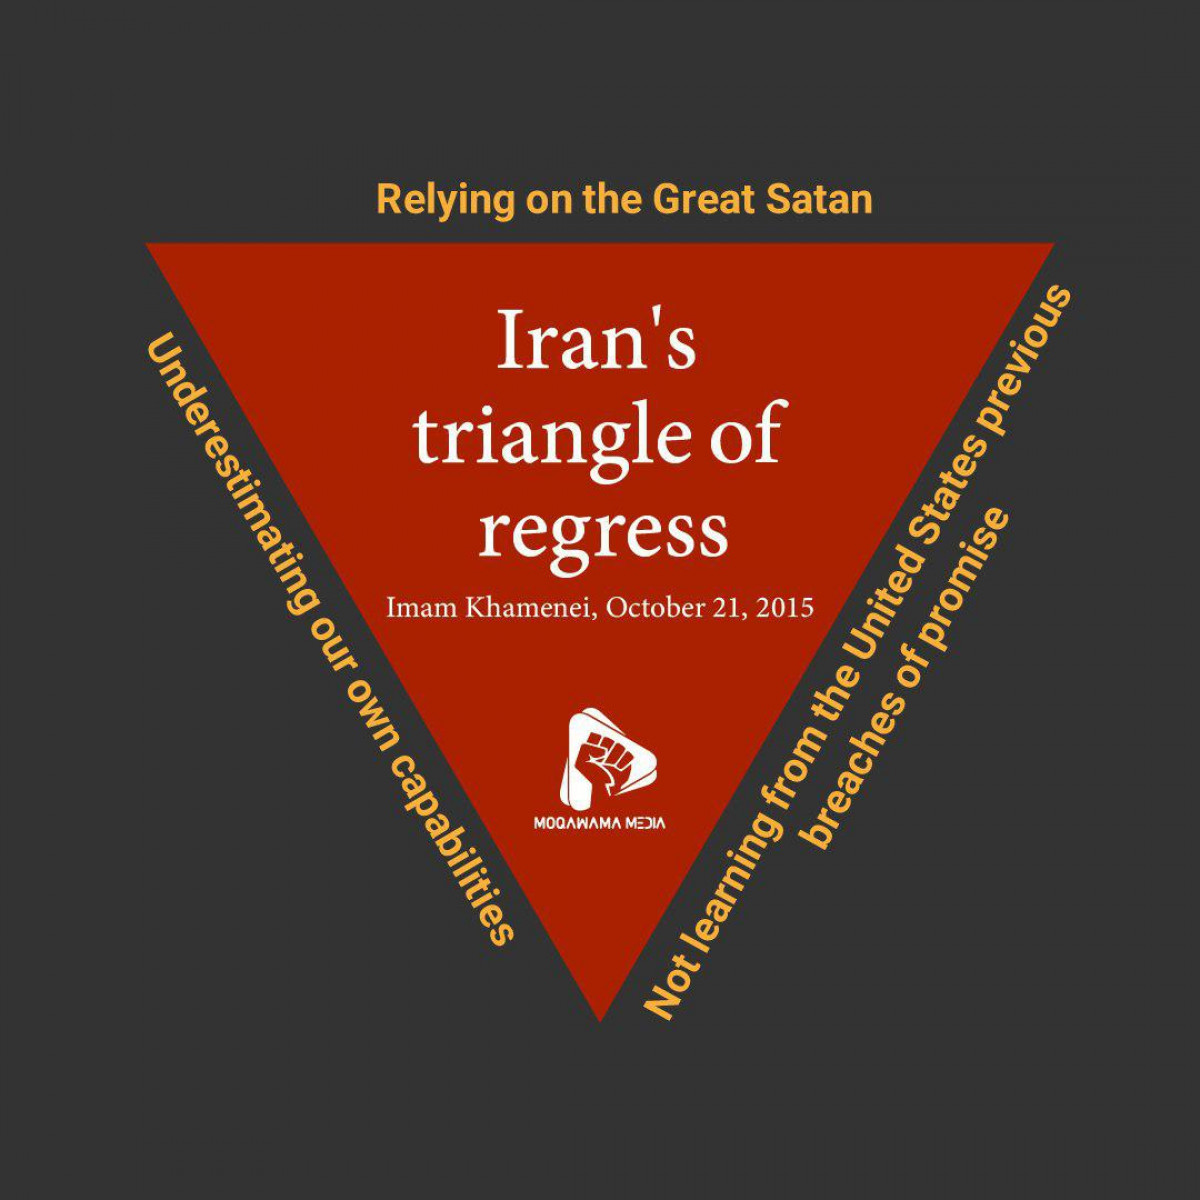 (The three sides of) Iran's triangle of regress (are):